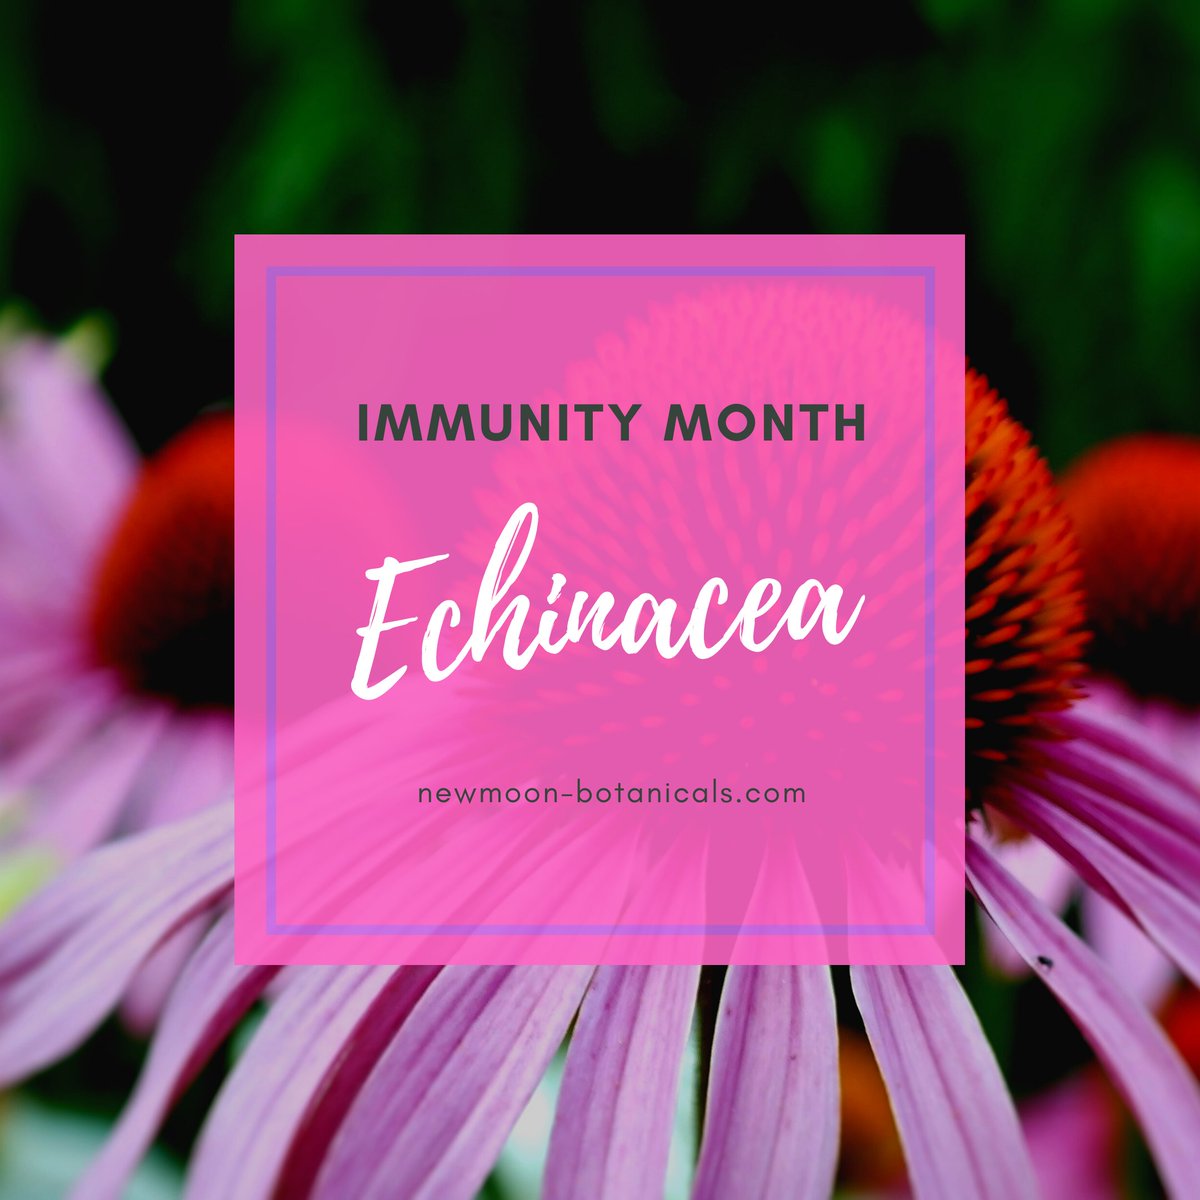 Echinacea is one of the most well know remedies that has direct effect on immune system. 
.
.
.
.
.
#echinacea #echinaceapurpurea #echinaceatea #immunitybooster #immunitysupport #immunitytips #herbalmedicine #medicalherbalist #london